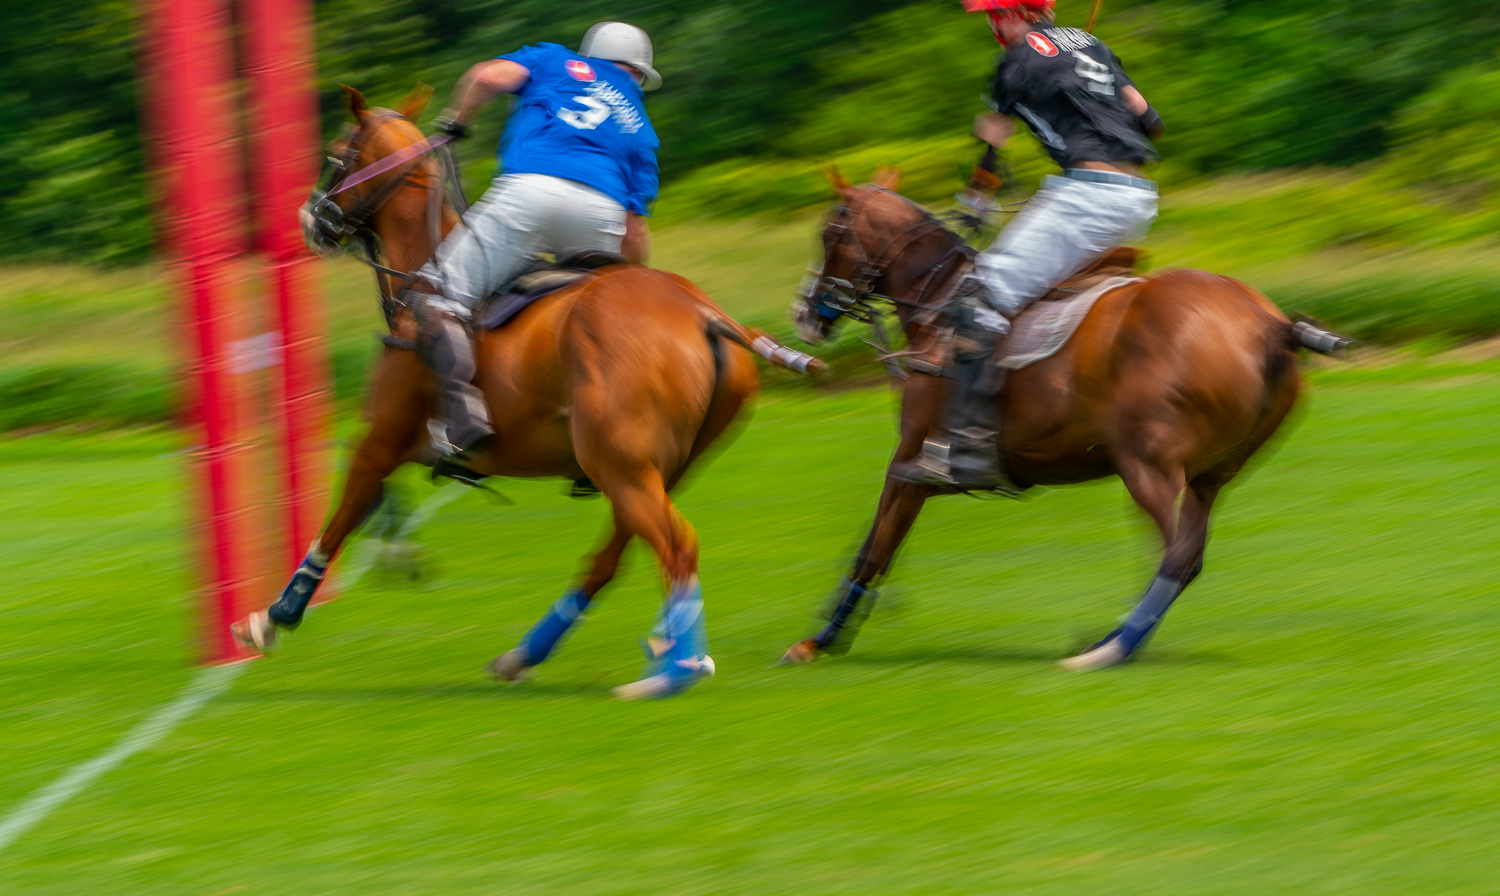 Defending the goal at the mashomack polo club in pine plains, ny.  Polo is a contact sport..jpg